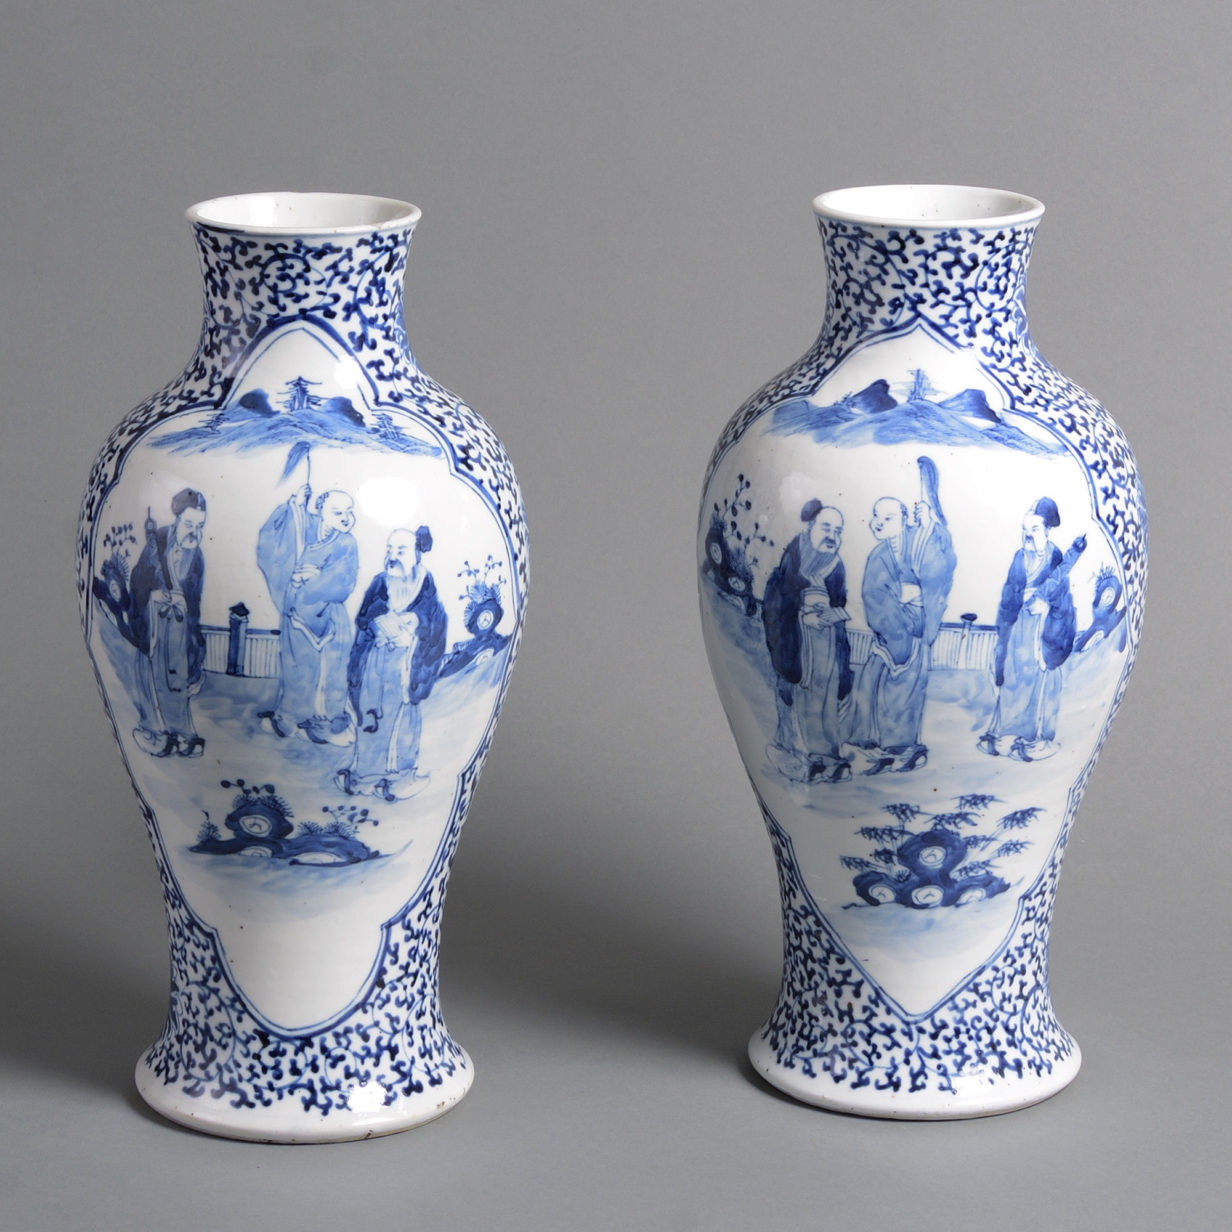 A Pair of 19th Century Qing Period Blue and White Porcelain Vases